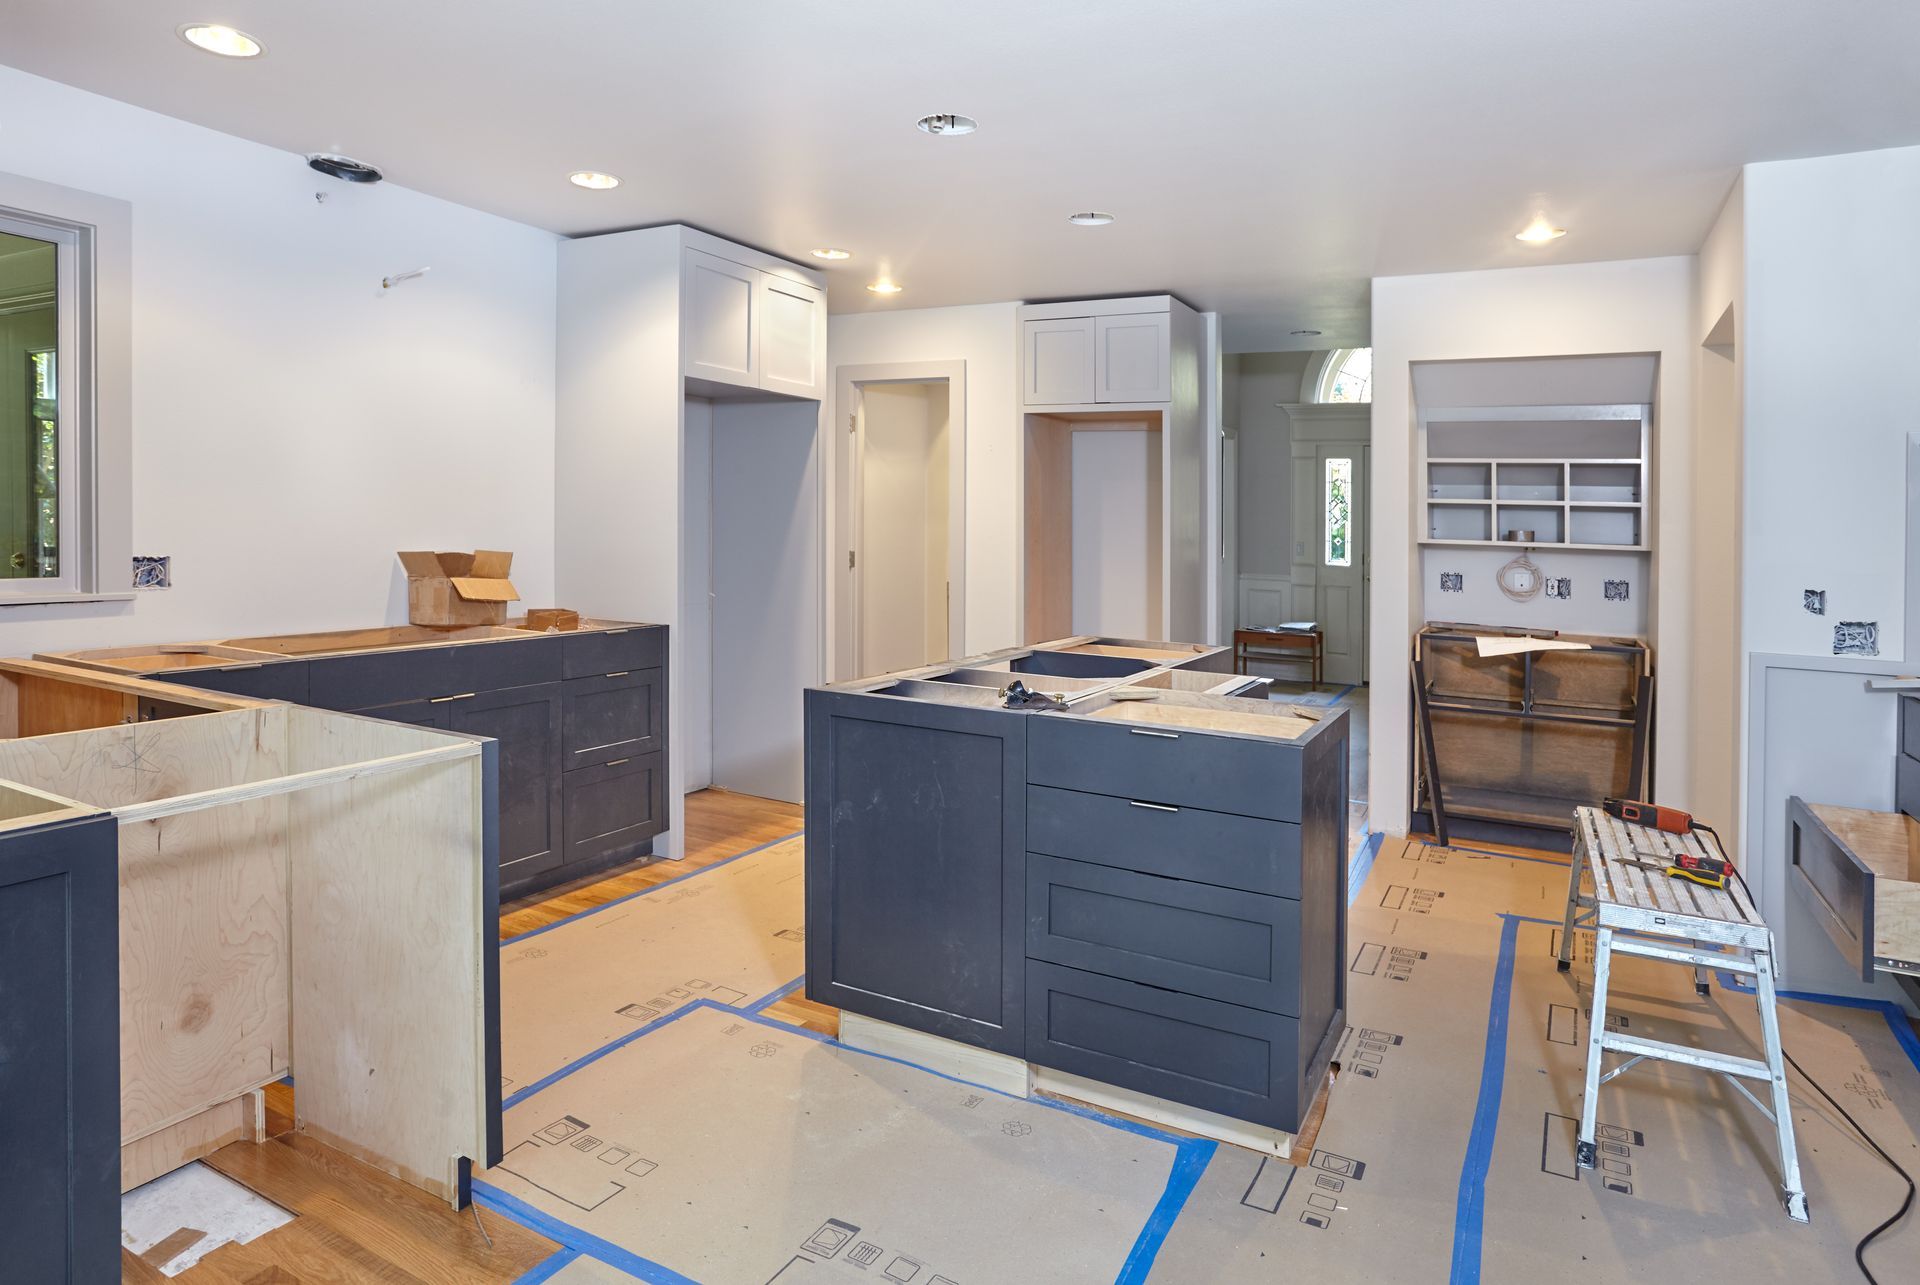 Renovate to Sell: Boosting Your Home's Resale Value